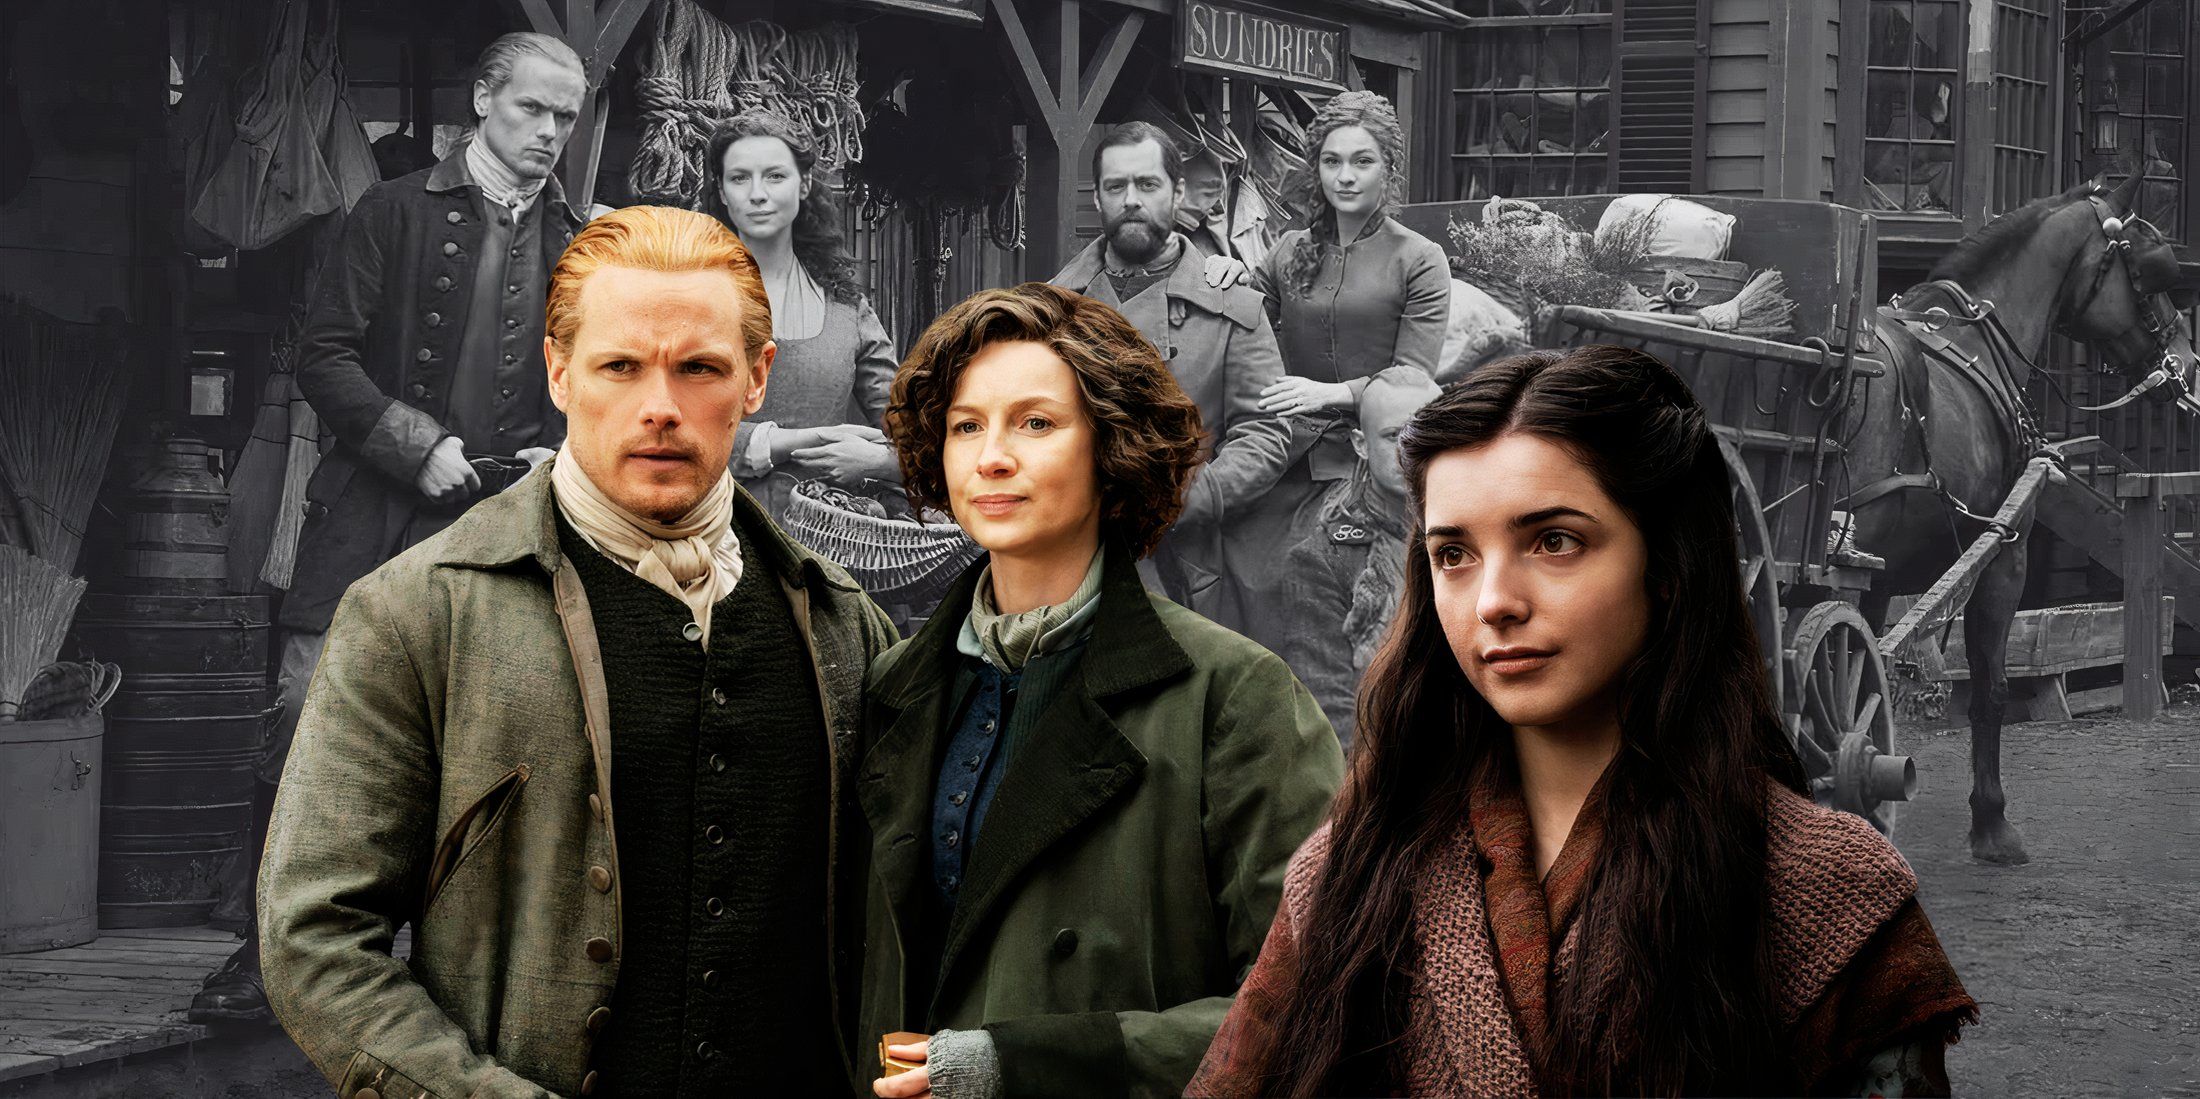 Outlander characters Jamie, Claire, and Malva appear over an image of the Fraser family in Outlander Season 6